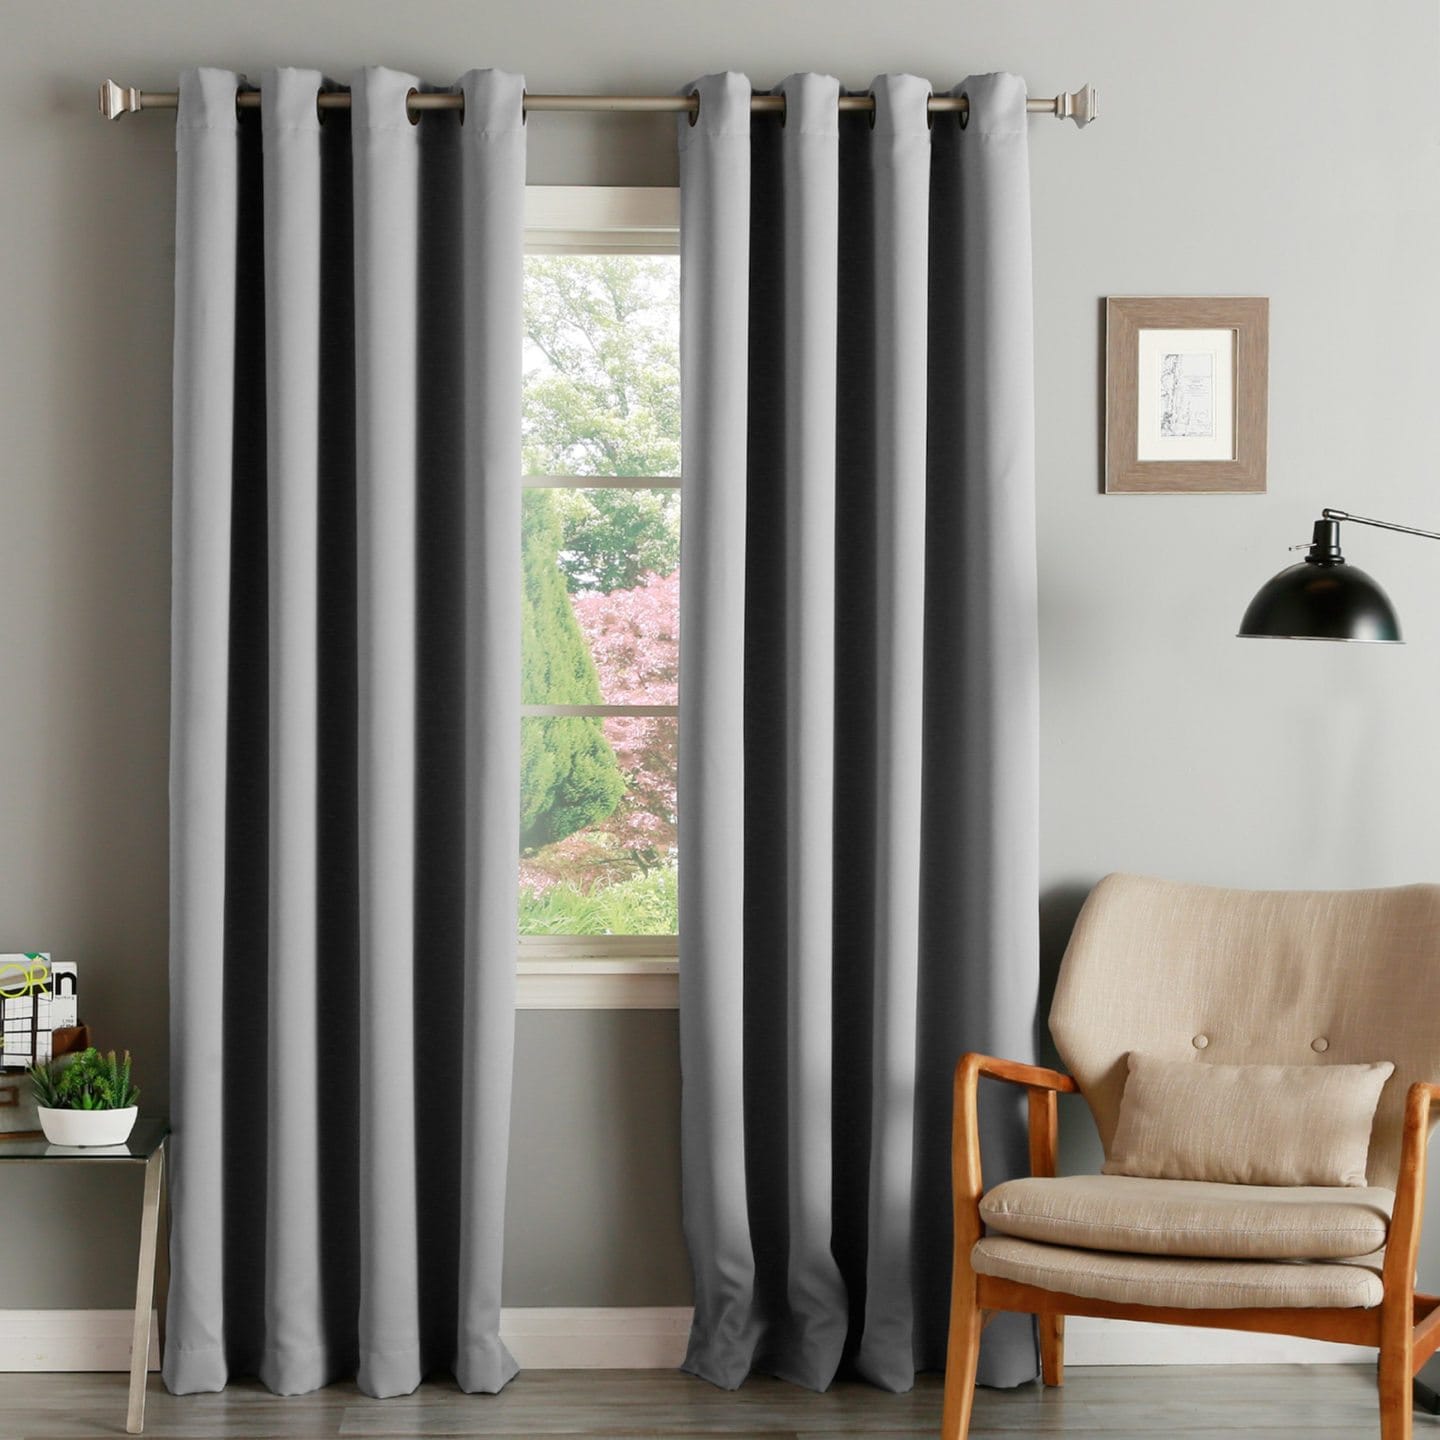 Superman Blackout Lined Curtain Panels Thermal Insulated Window Drapes 2 Panels 